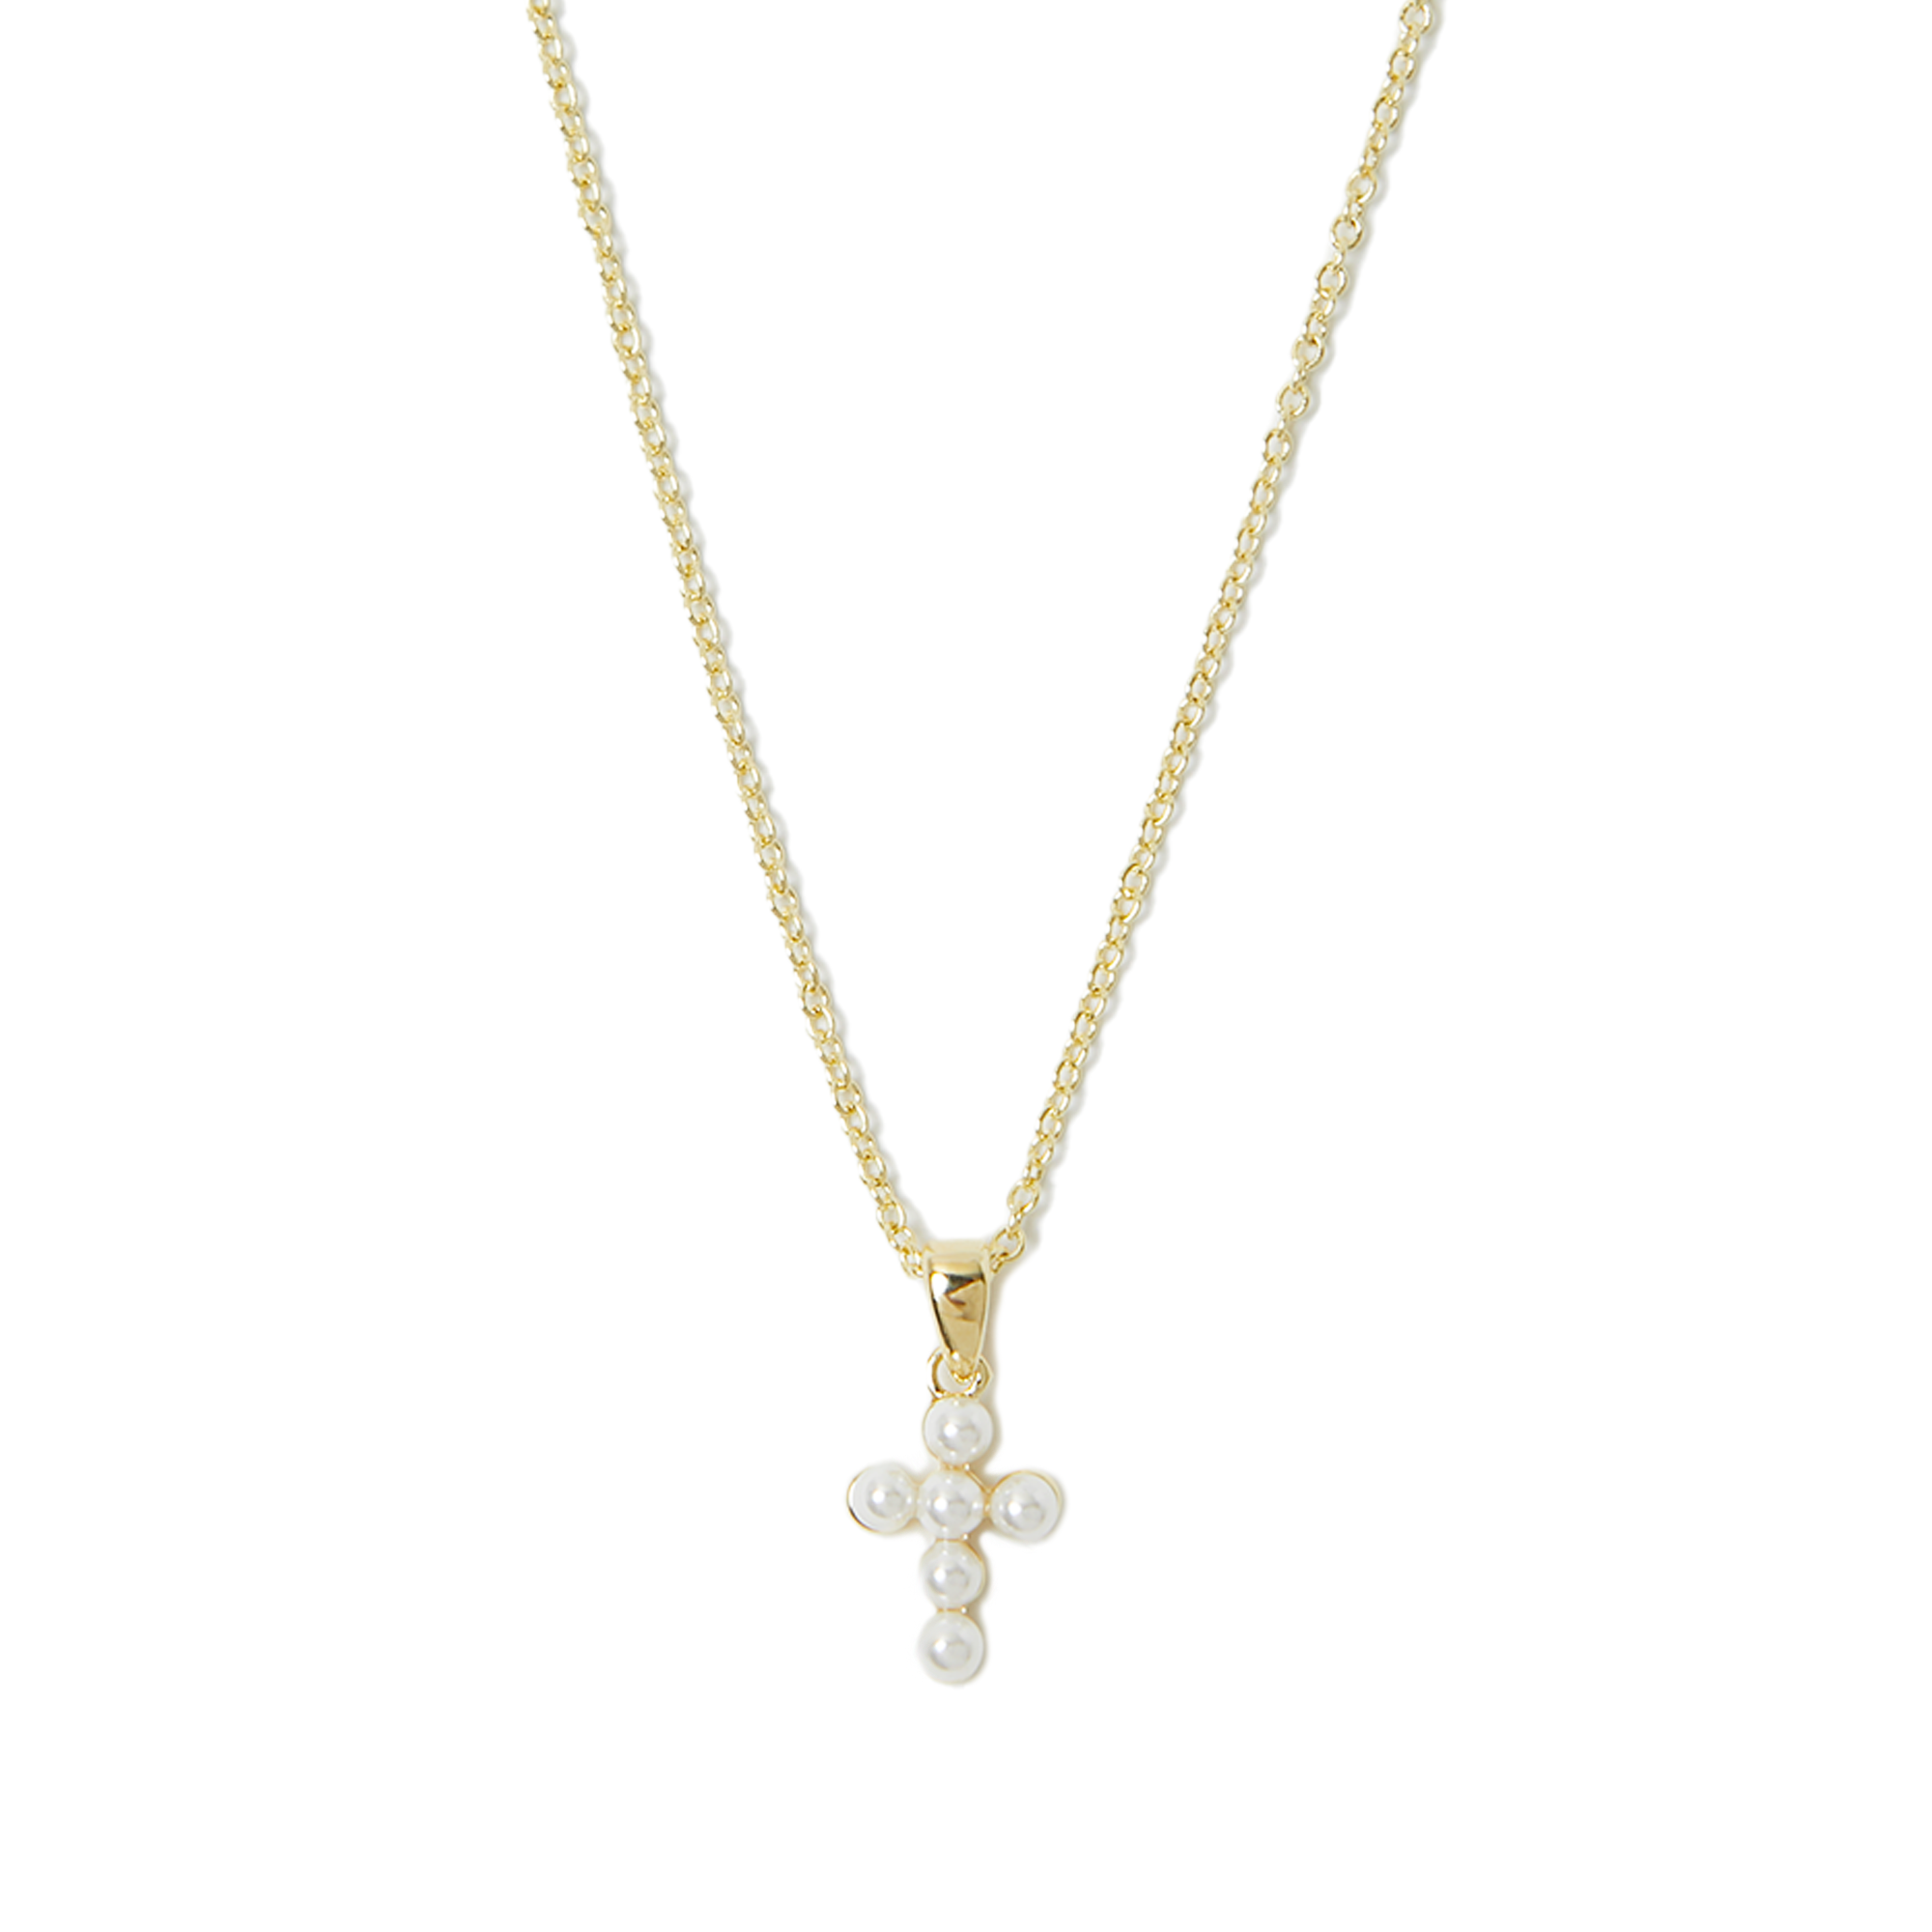 THE PEARL CROSS NECKLACE